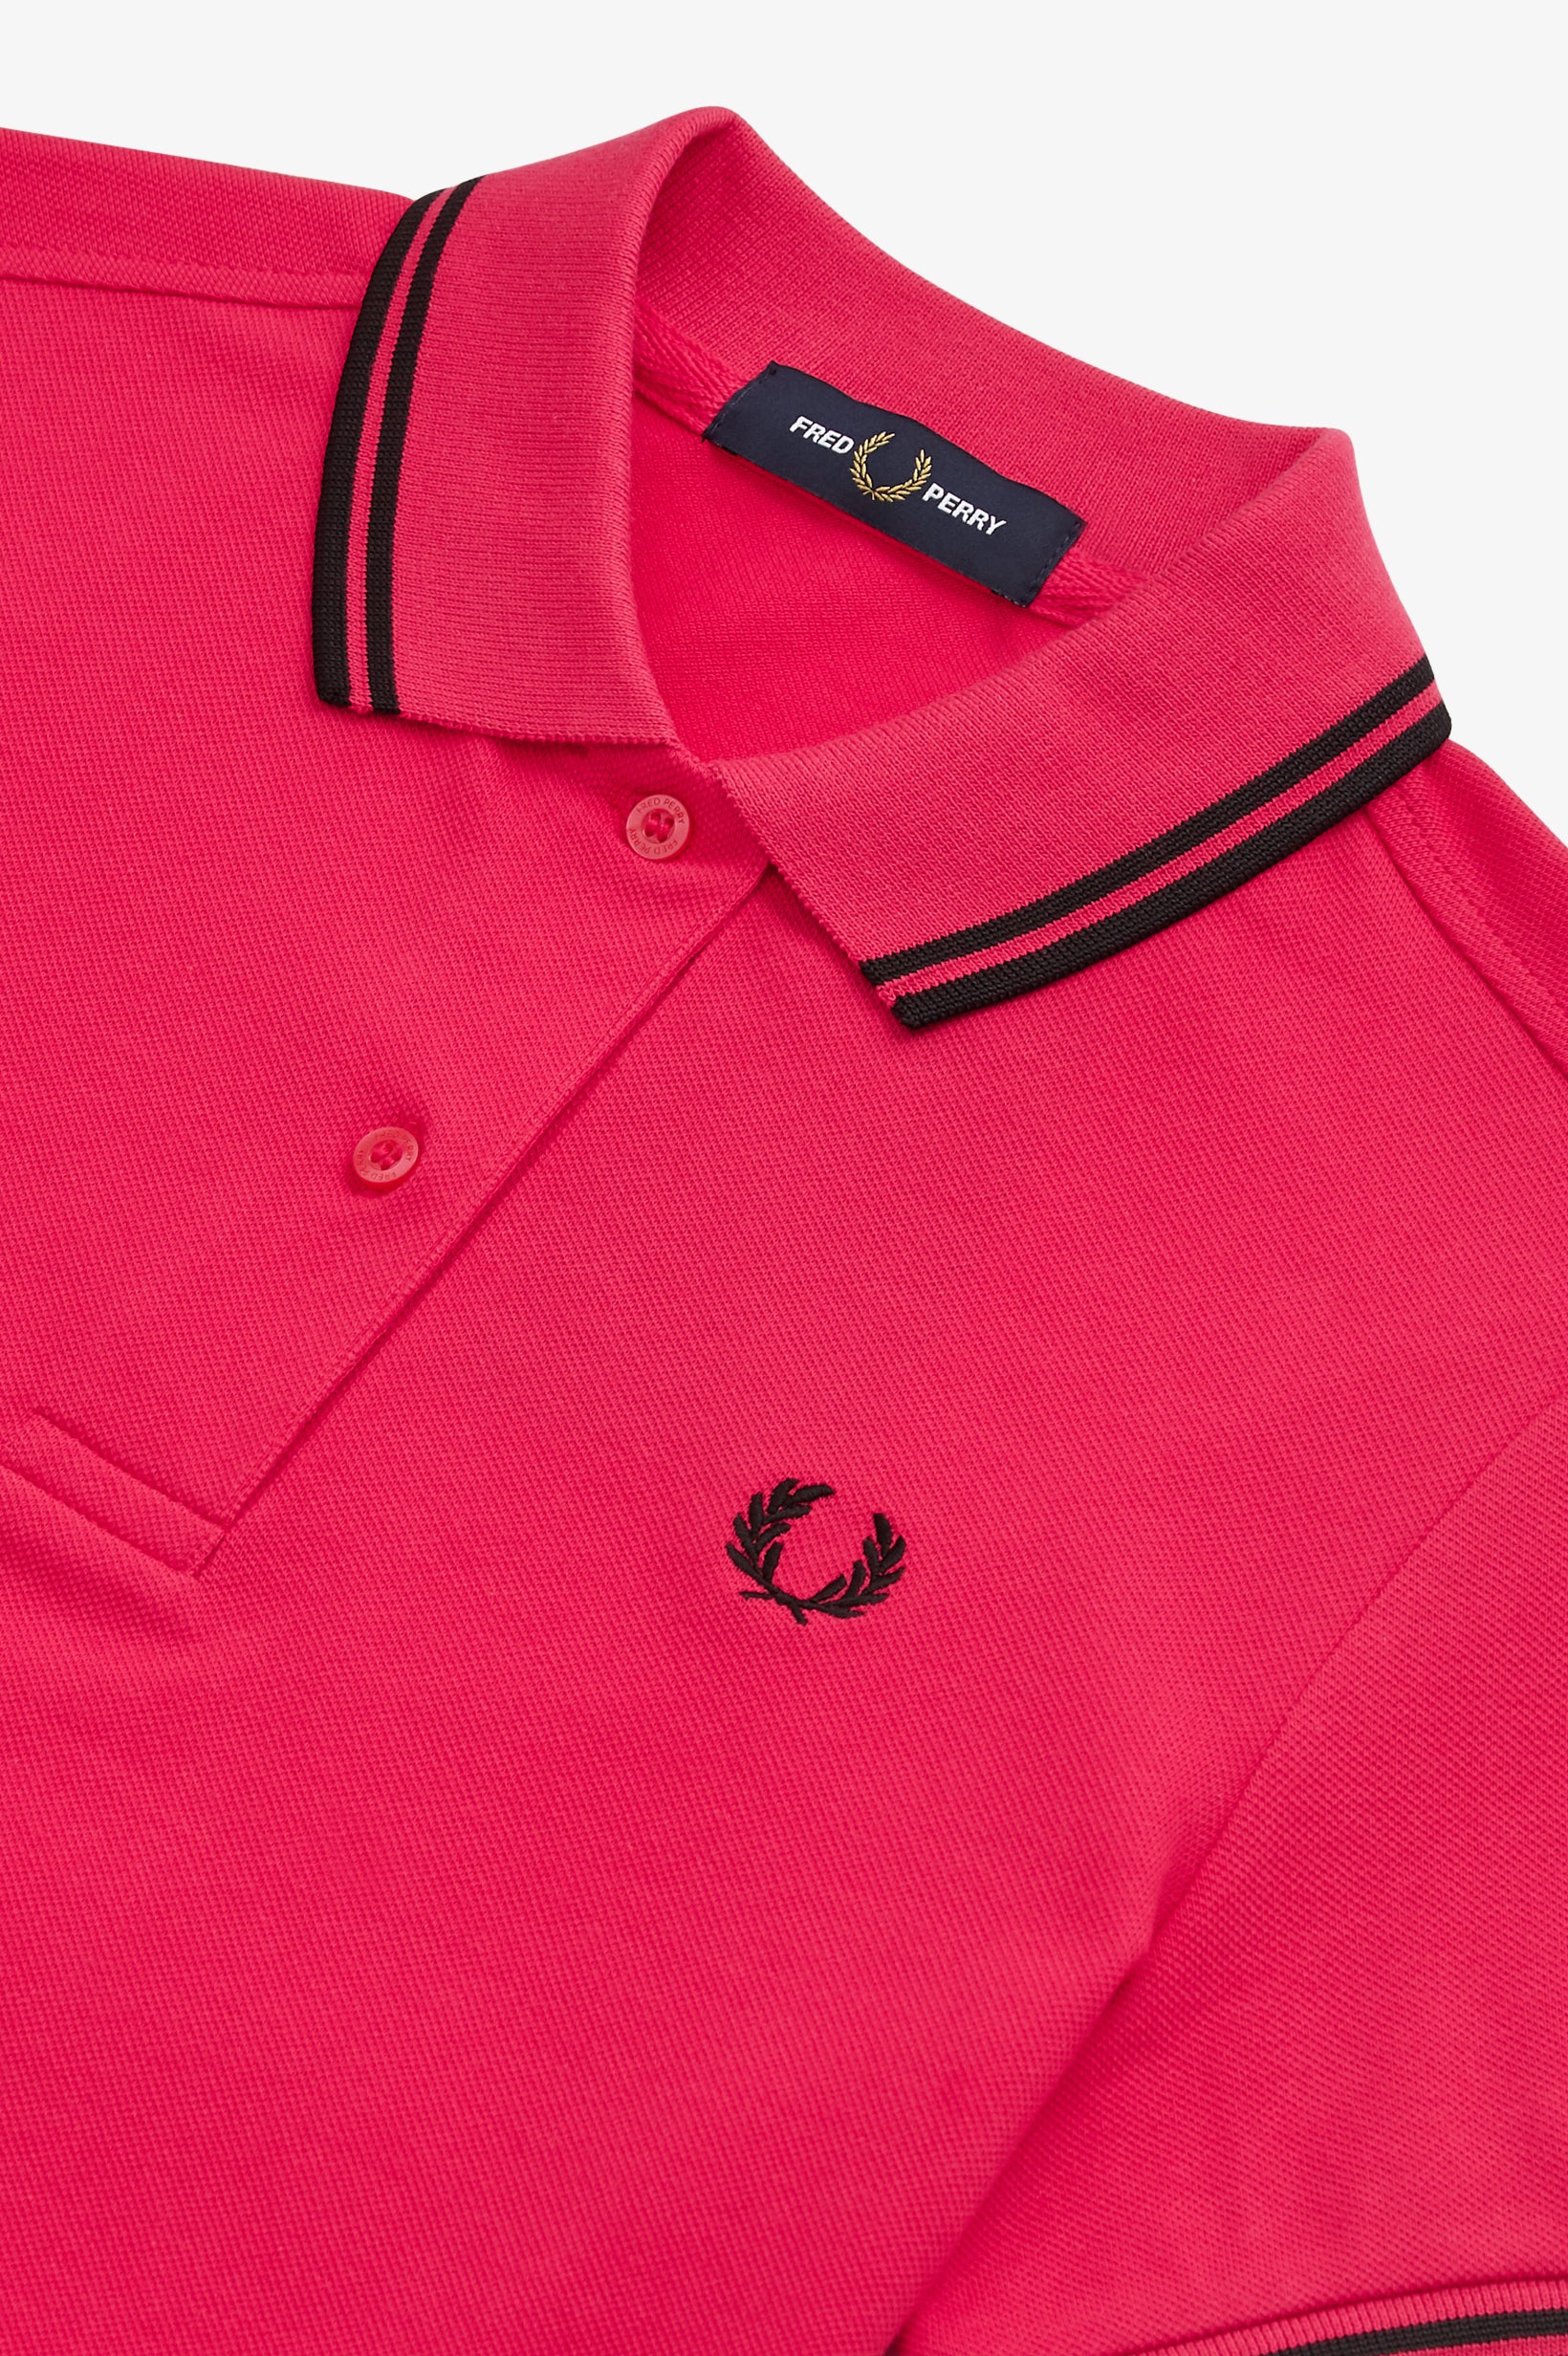 LADIES TWIN TIPPED FRED PERRY SHIRT (LOVE POTION/BLACK)